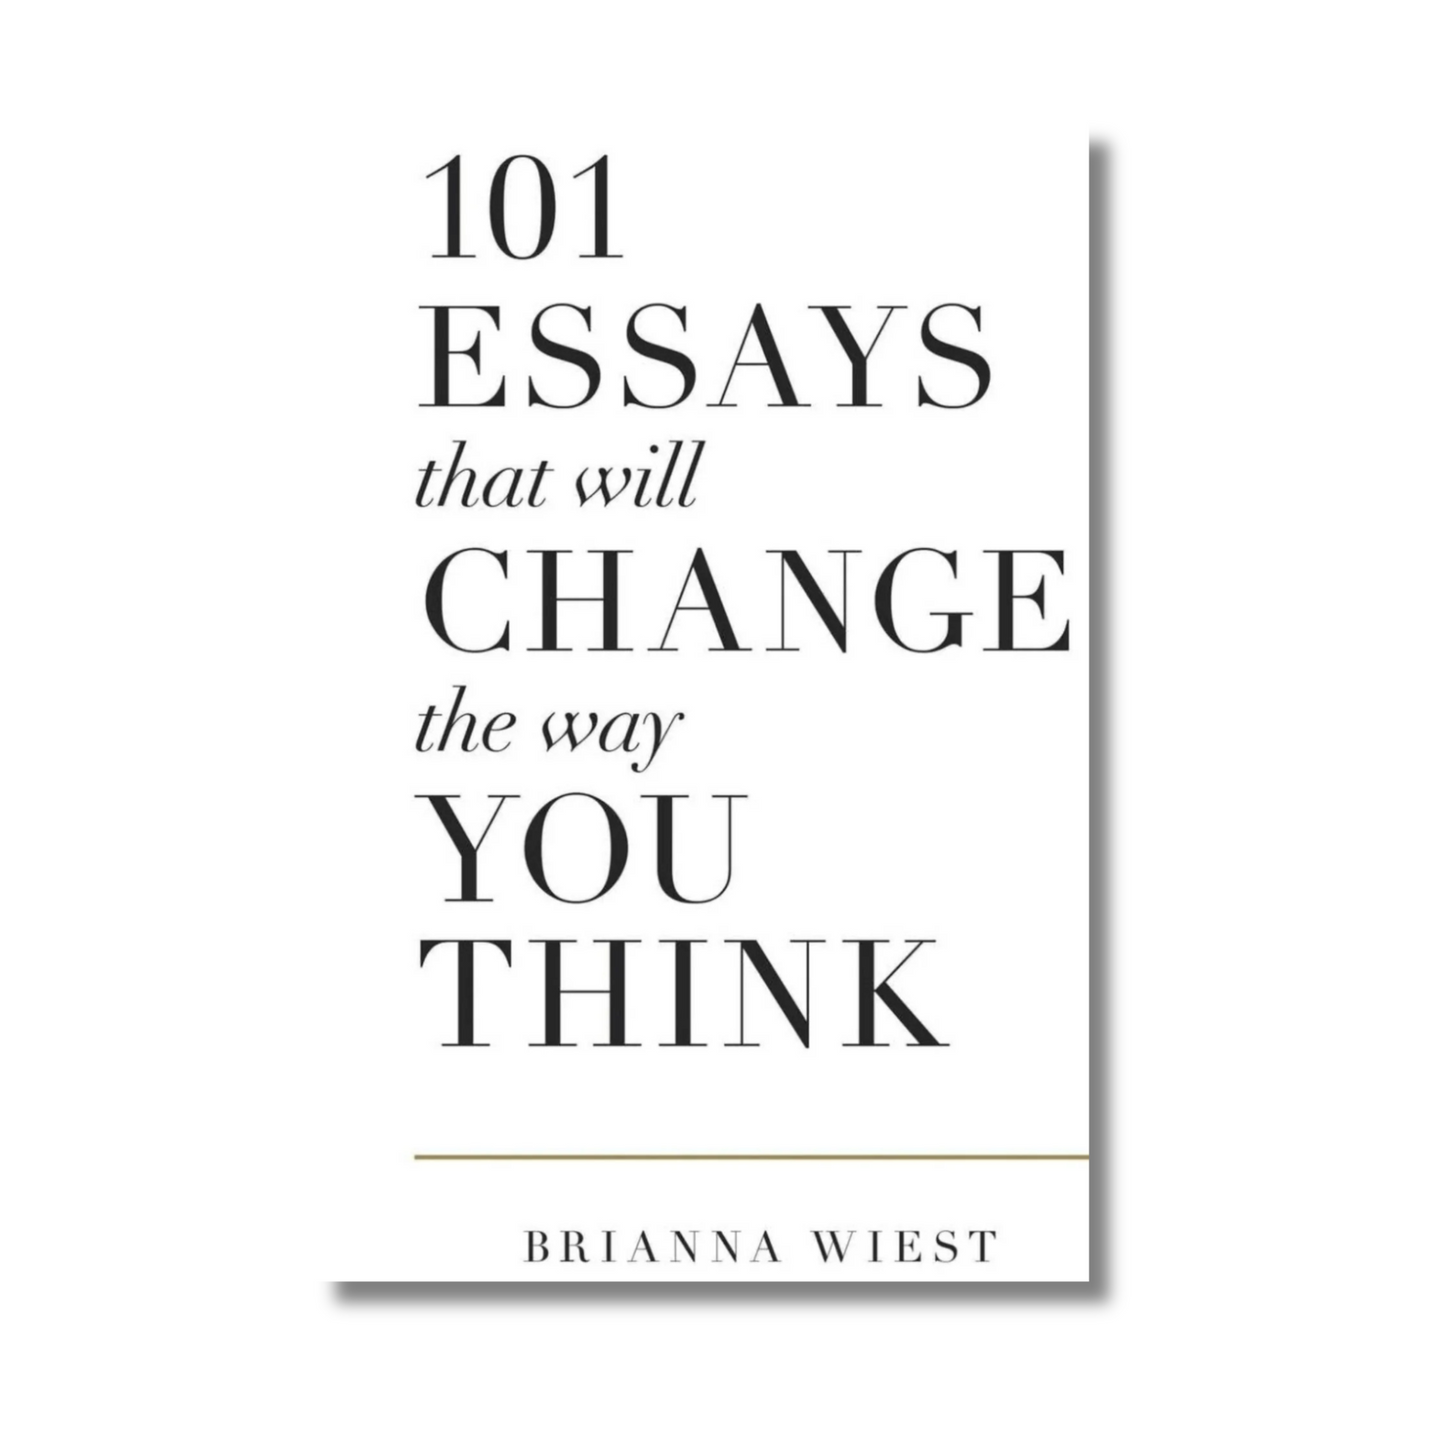 101 Essays That Will Change The Way You Think By Brianna Wiest (Paperback)